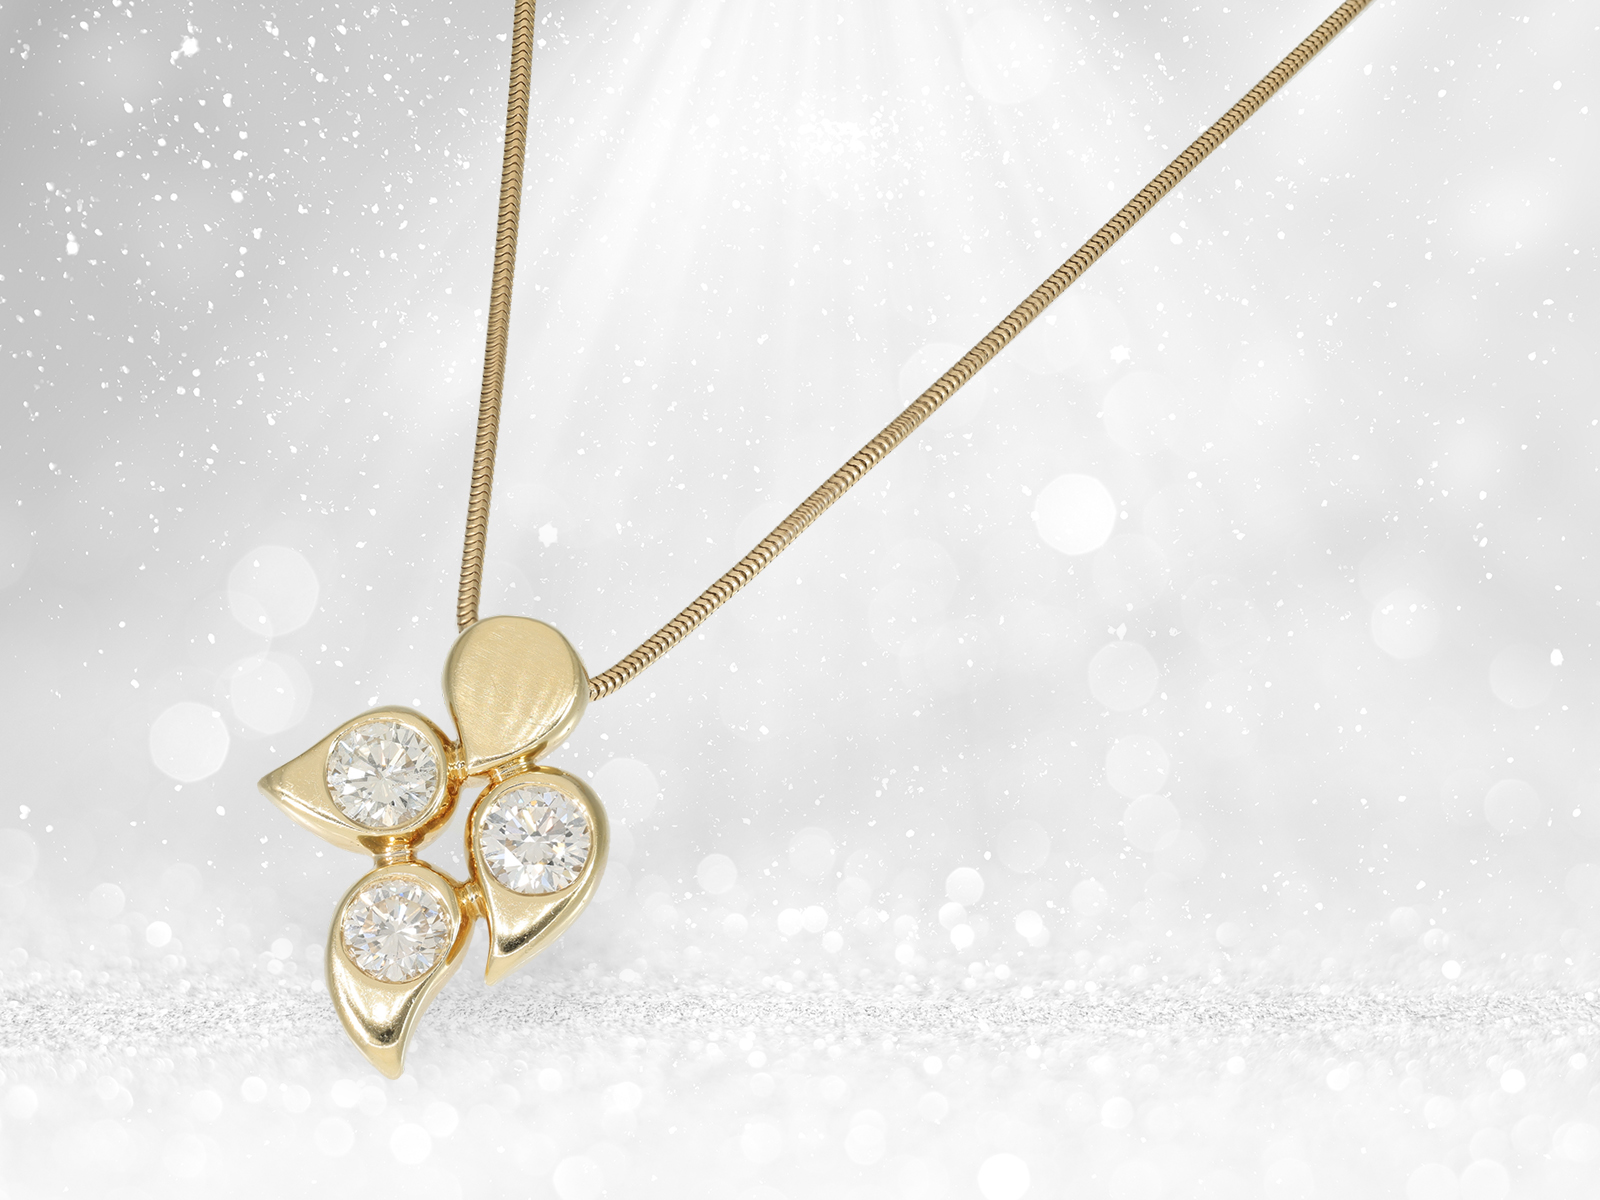 Gold snake chain with handmade brilliant-cut diamond gold pendant in floral design, approx. 2.18ct